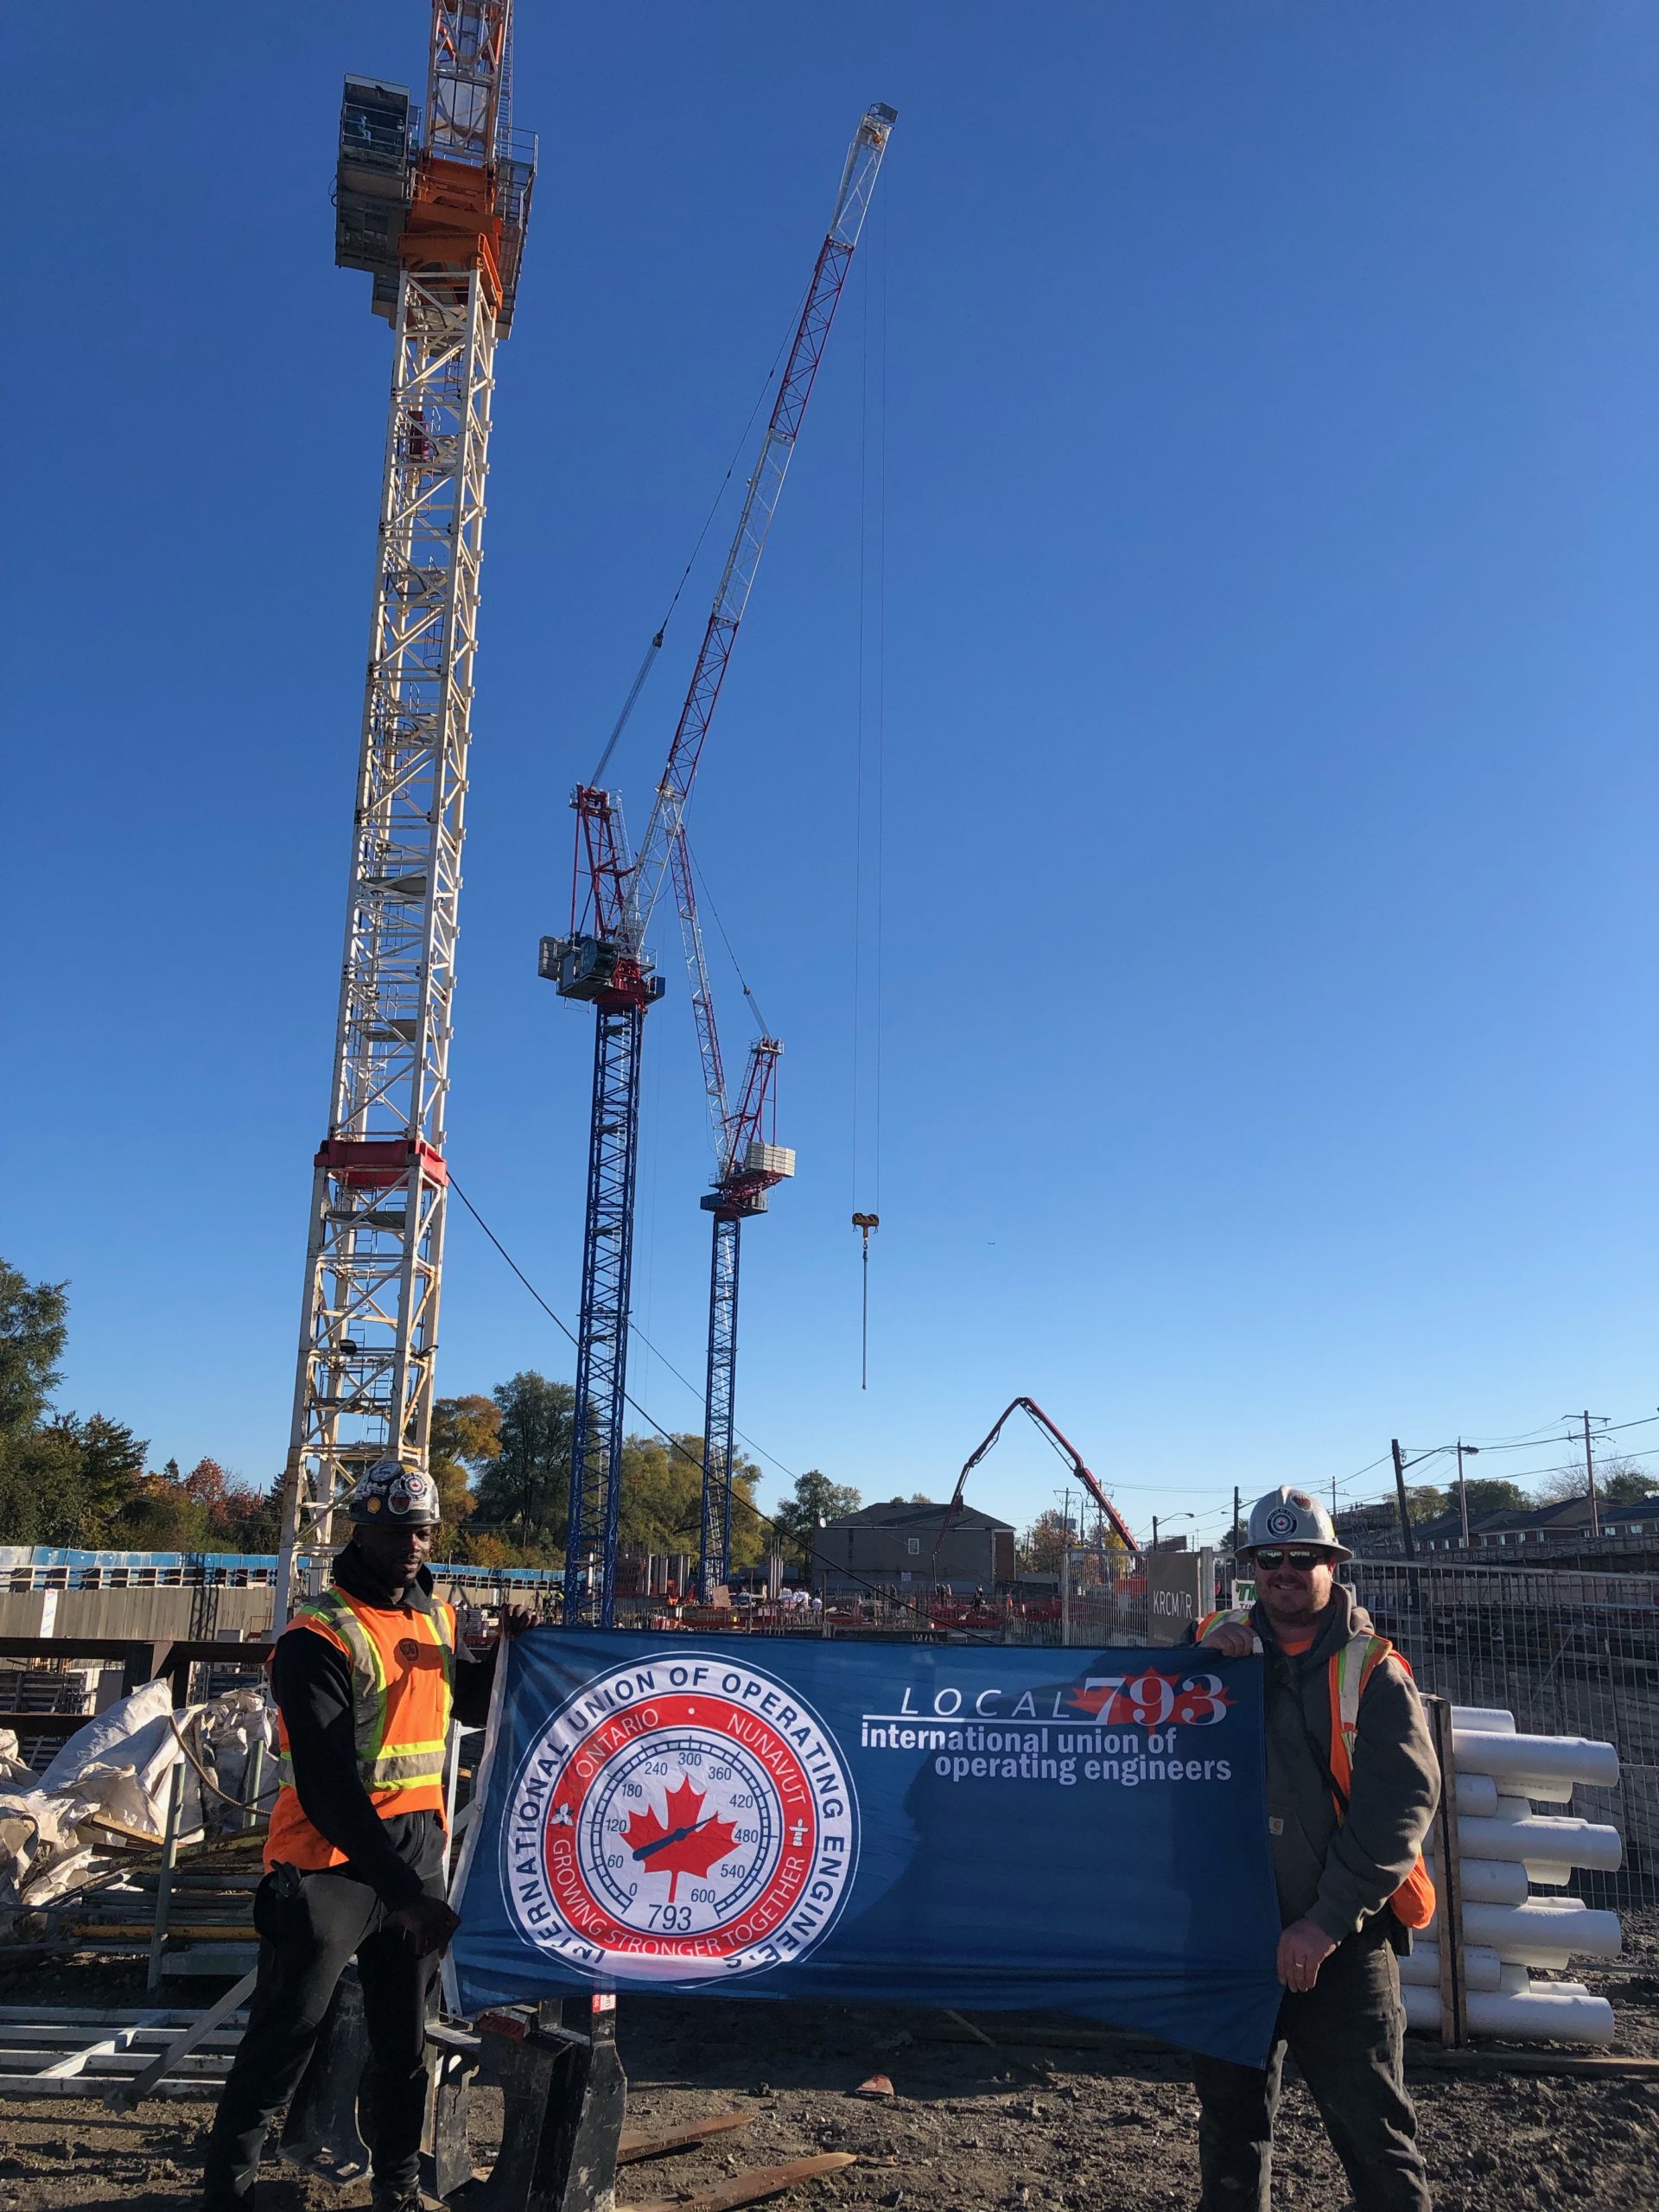 Local 793 apprentice Randy Sarba and Jesse Martin show their Local 793 pride in front of three tower cranes.